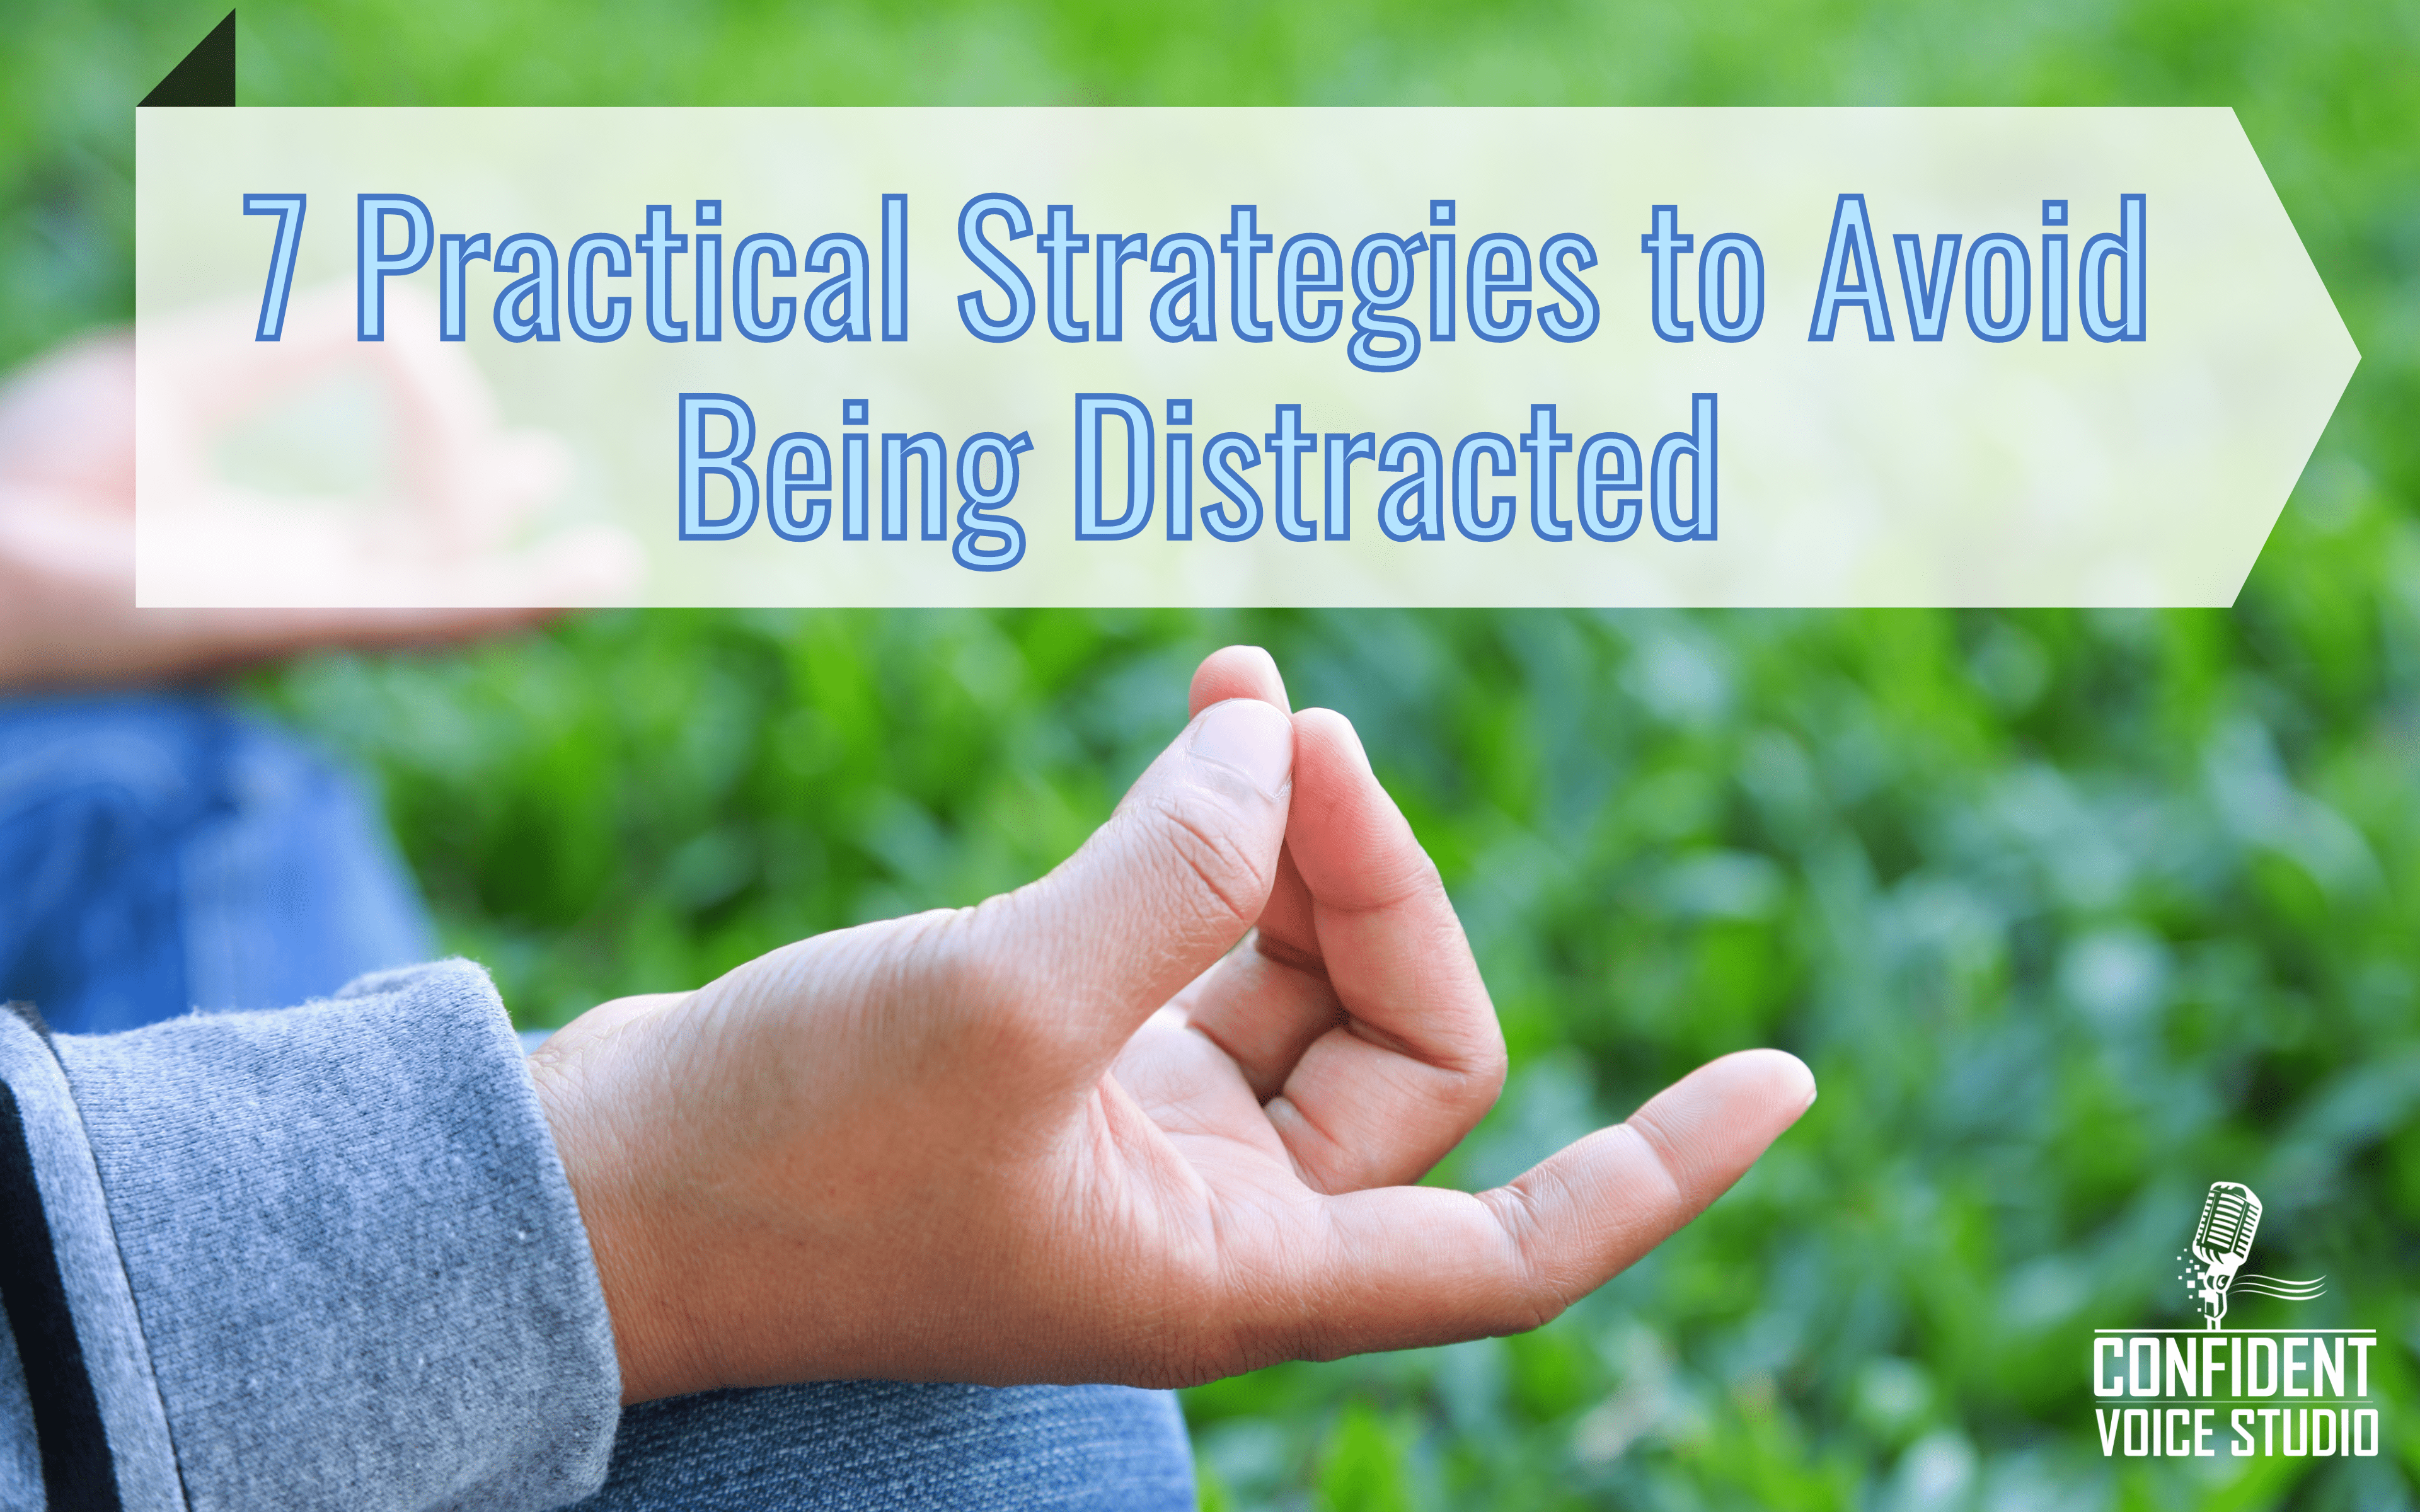 7 Practical Strategies to Avoid Being Distracted